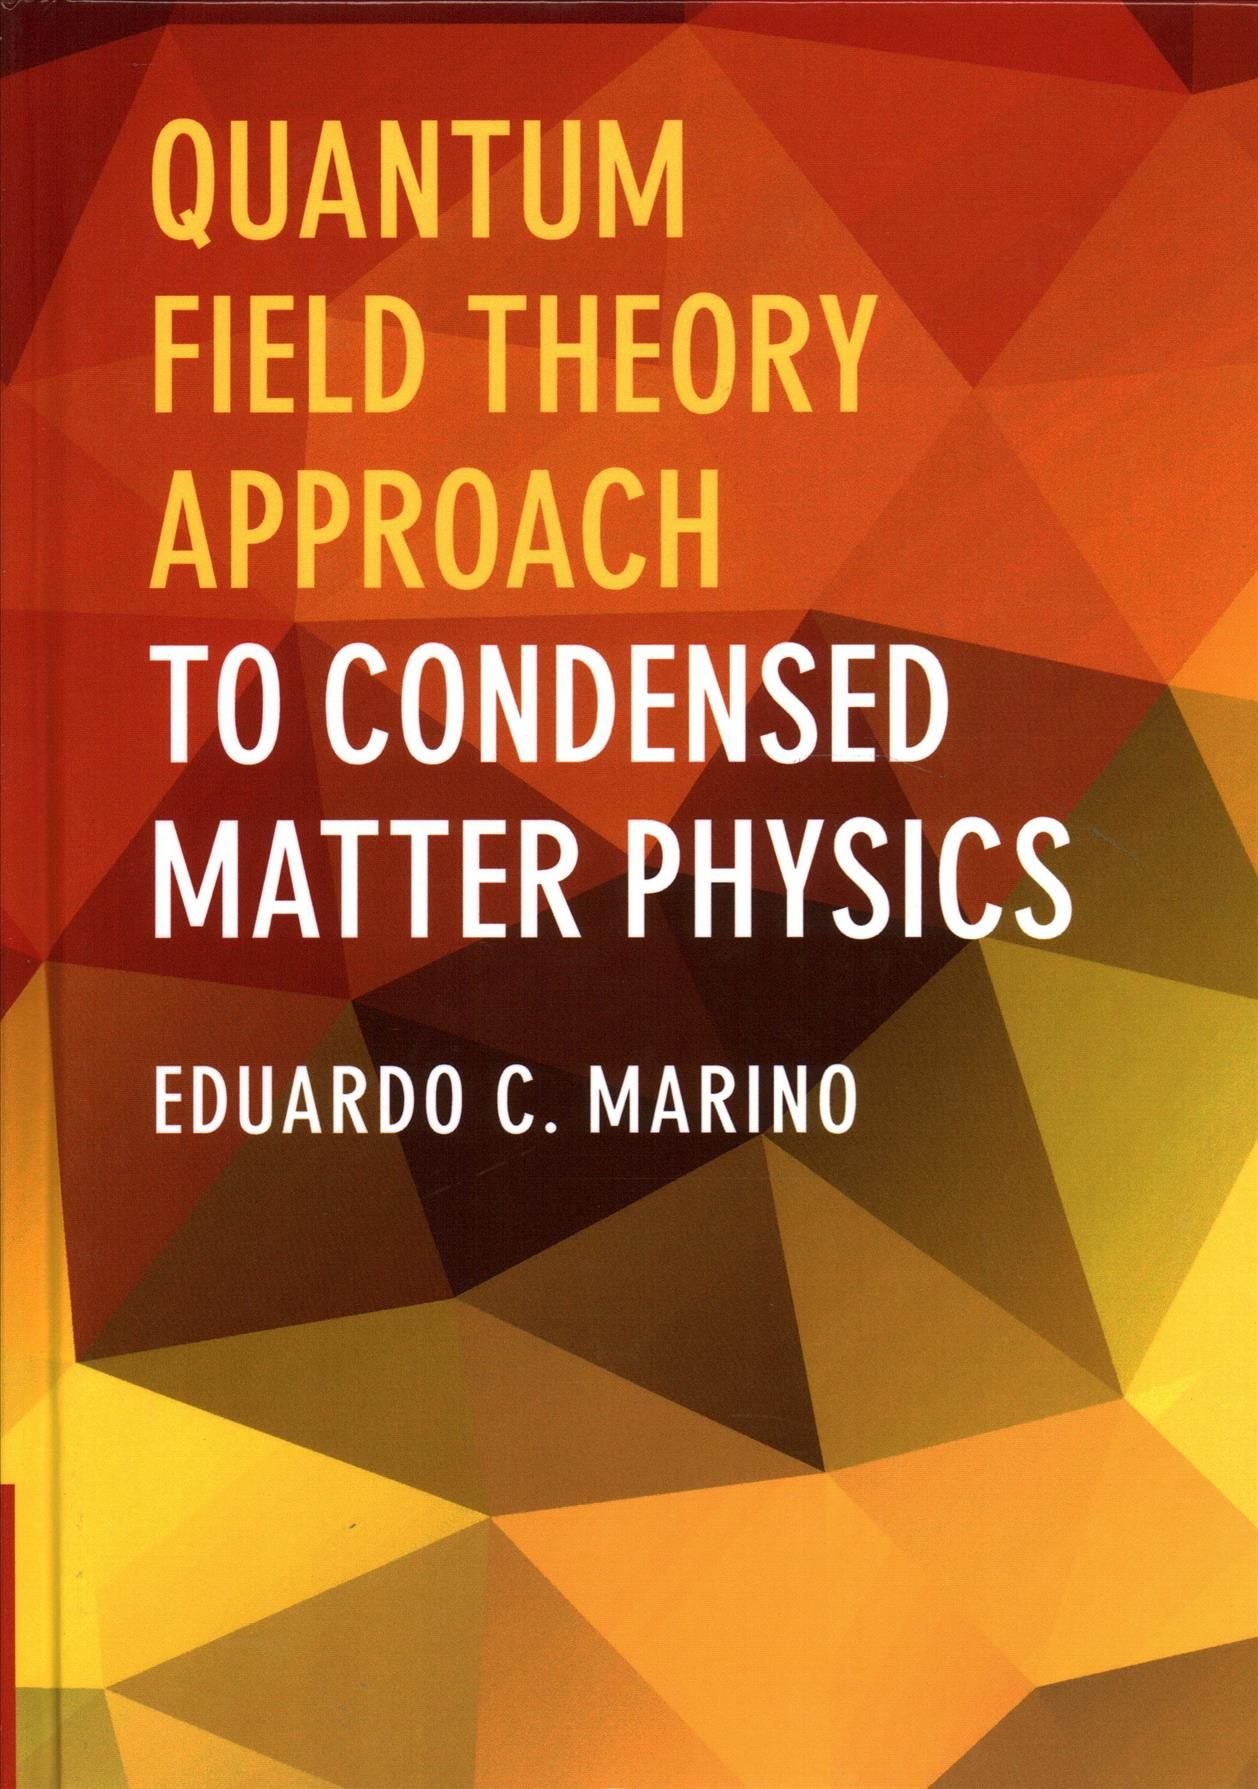 Quantum Field Theory Approach to Condensed Matter Physics